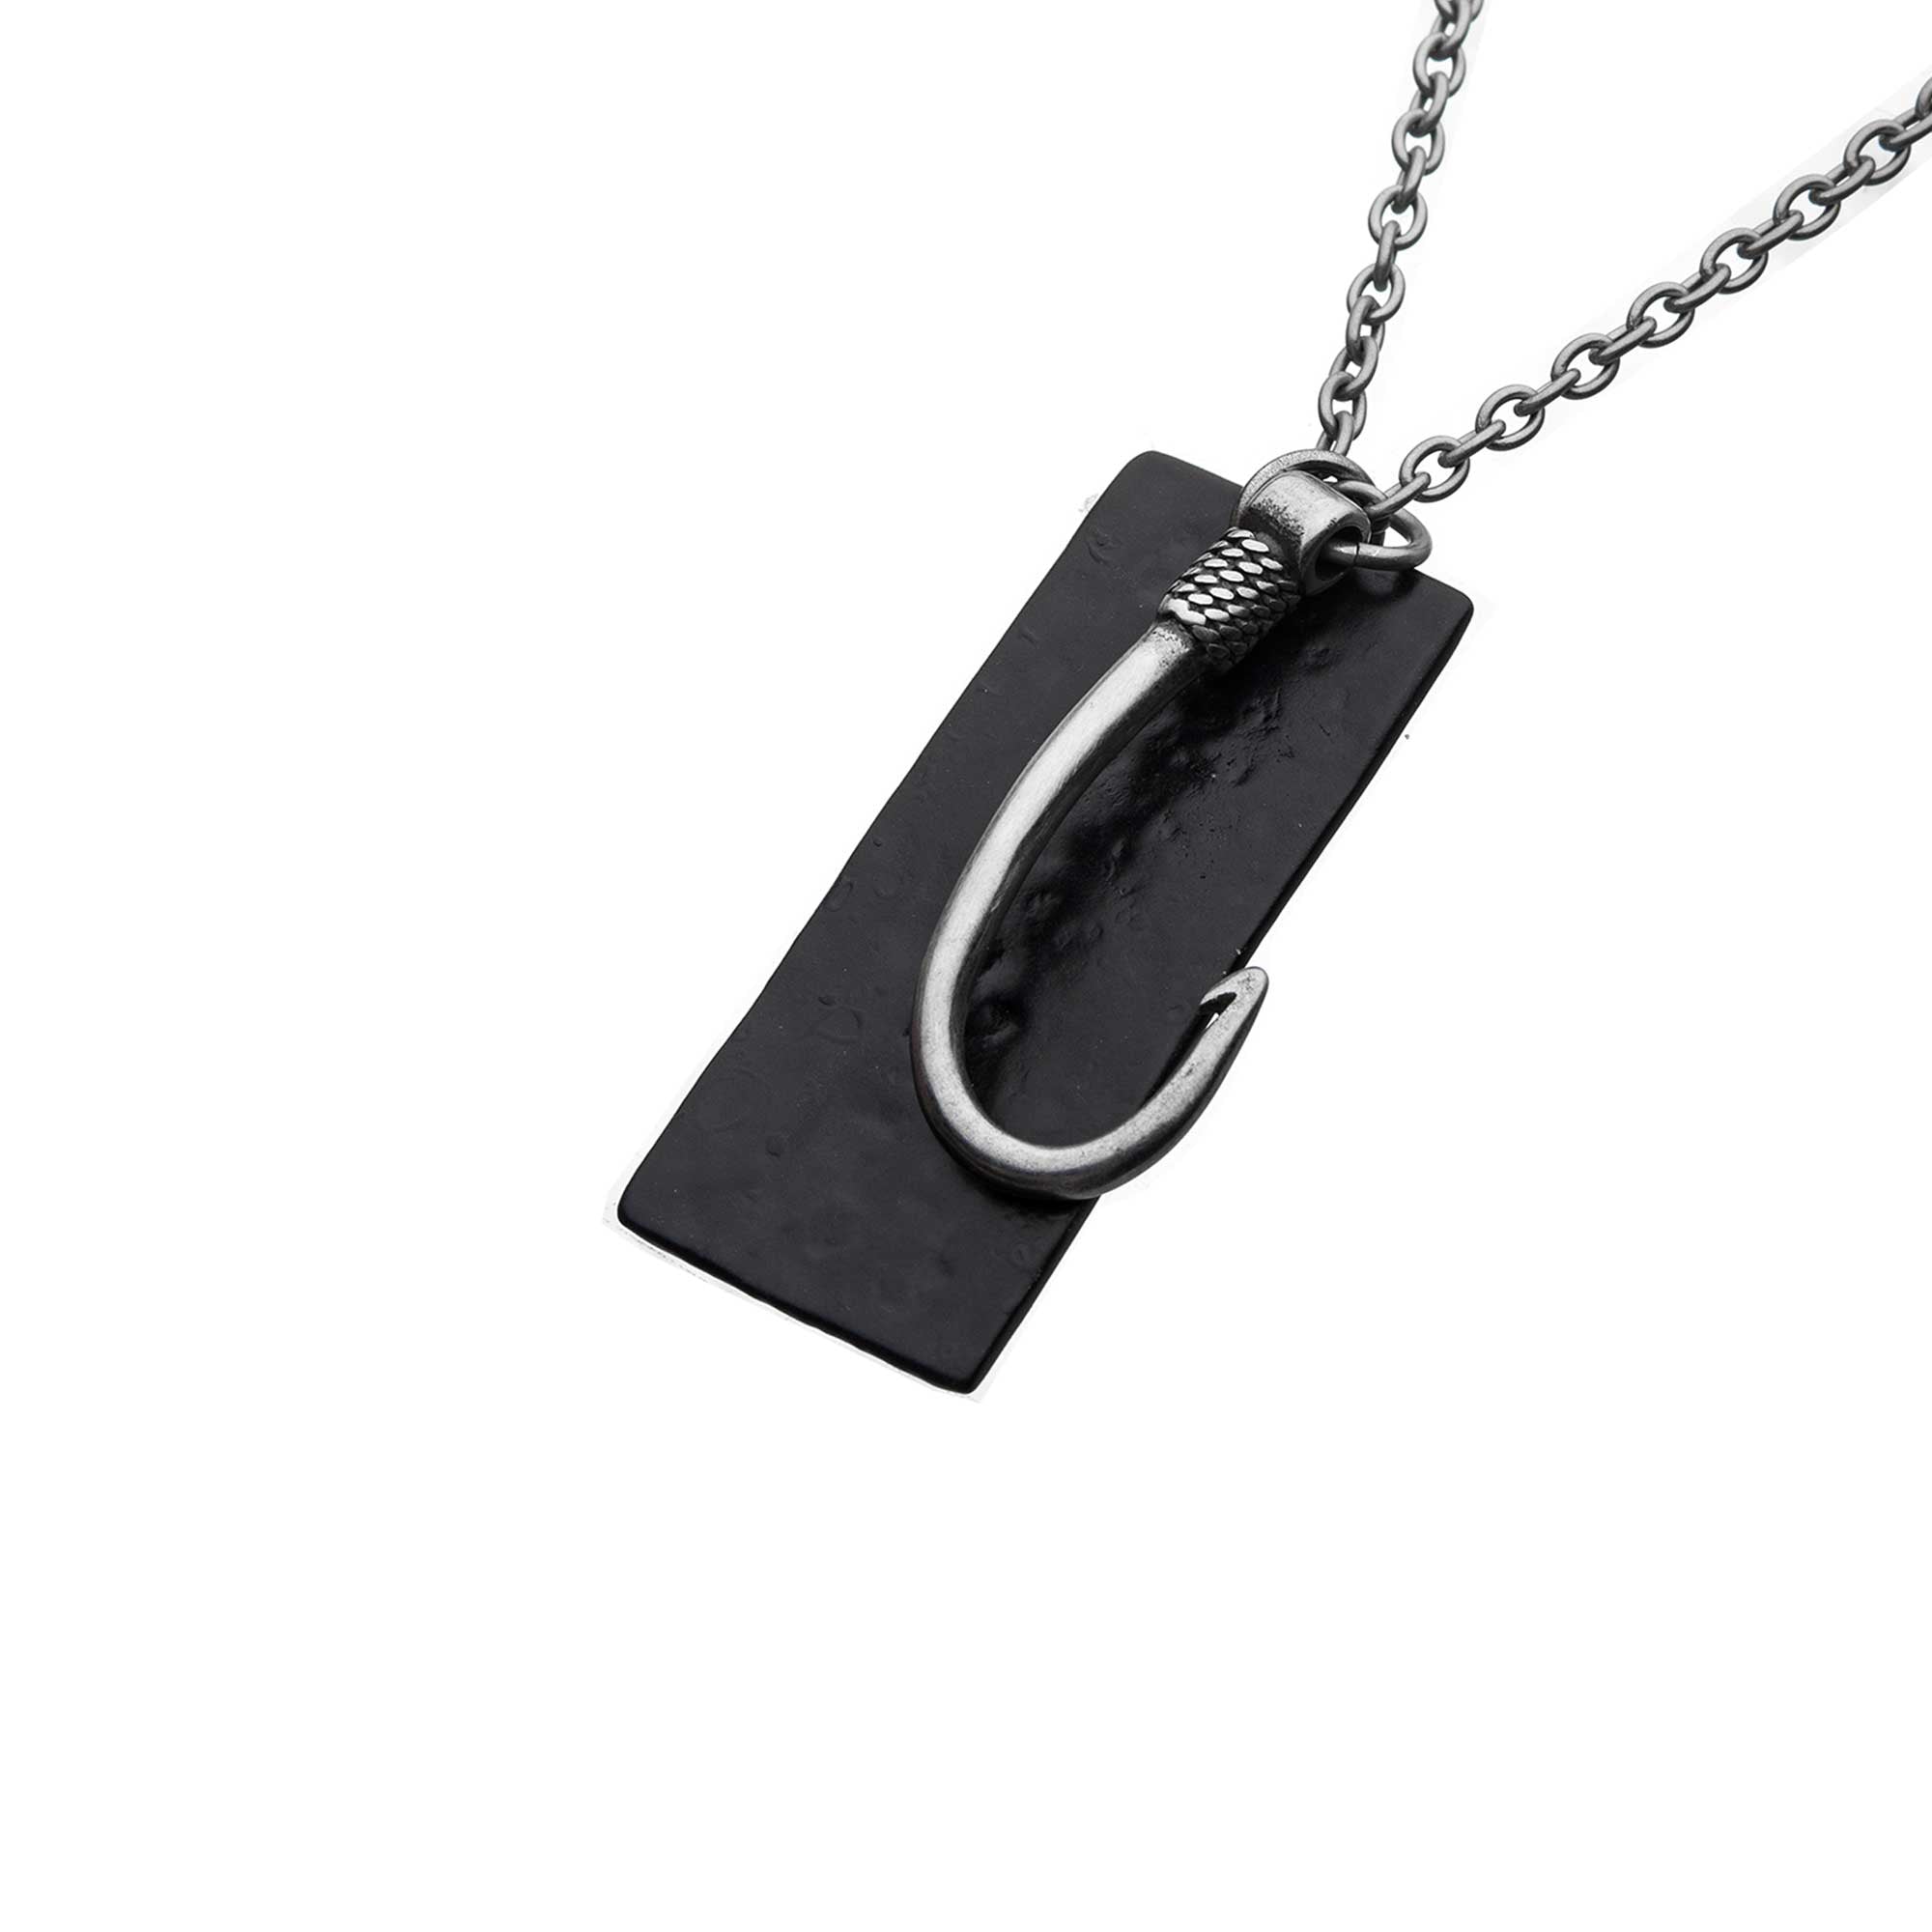 Stainless Steel Antiqued Finish Fish Hook and Black Leather Tag Pendant with chain